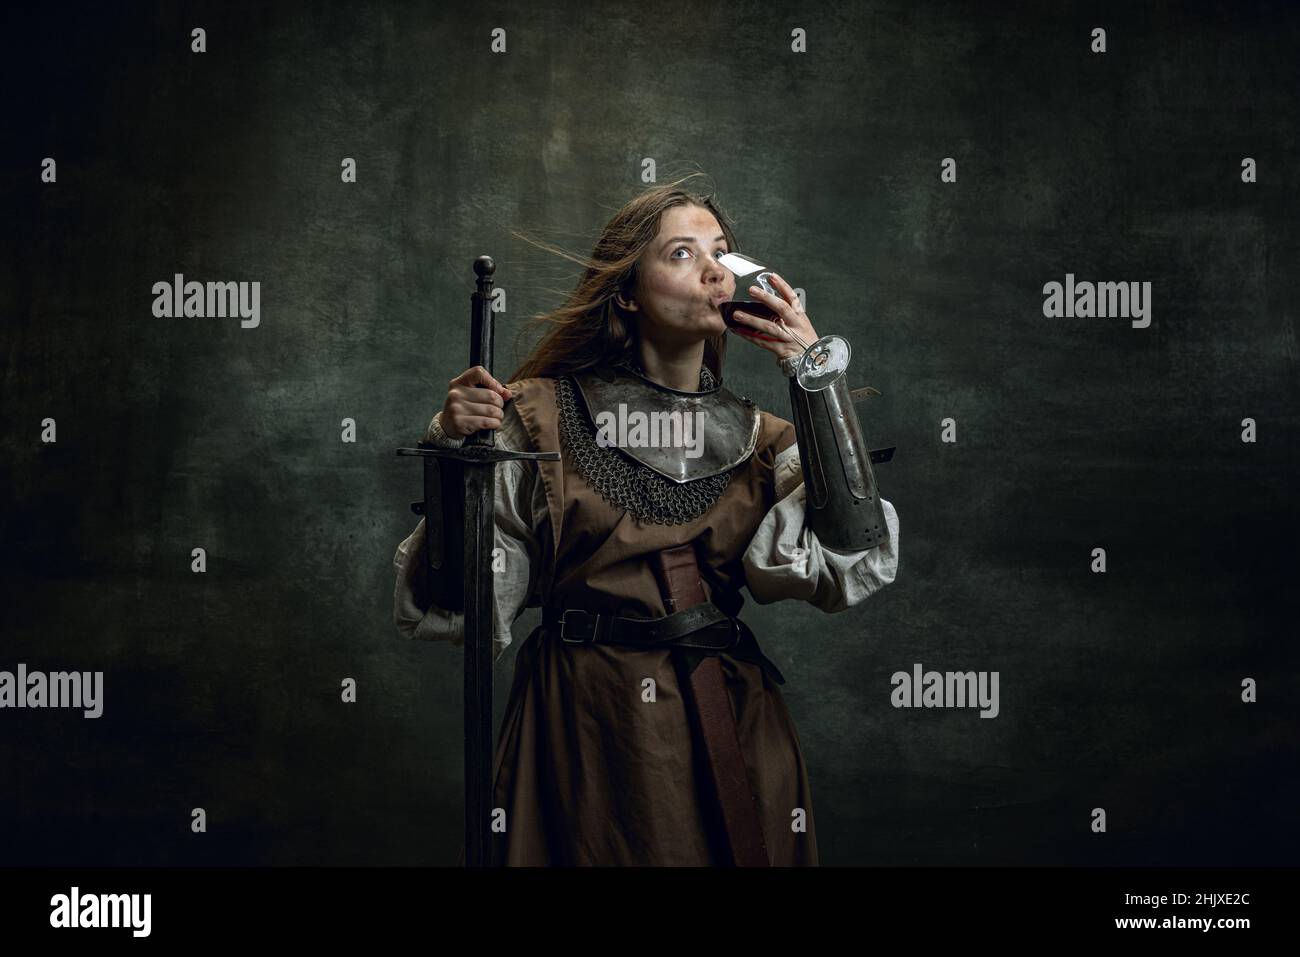 Vintage portrait of adorable woman, medieval female warrior or knight with dirty wounded face tasting wine isolated over dark retro background. Stock Photo